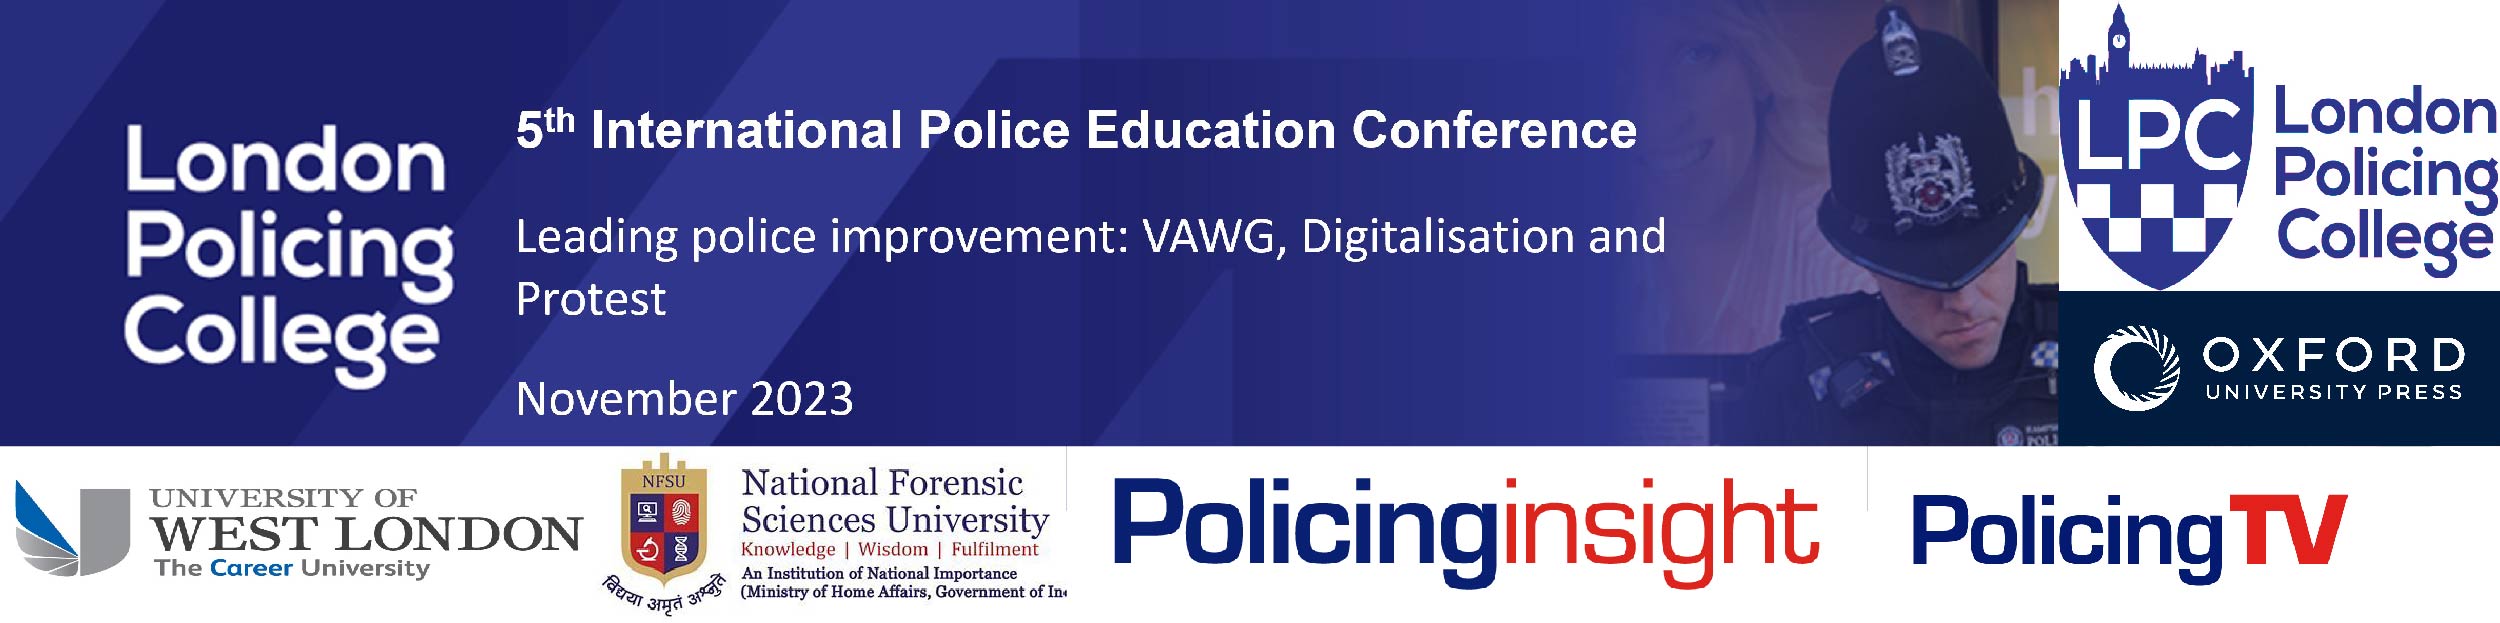 5th International Police Education Conference